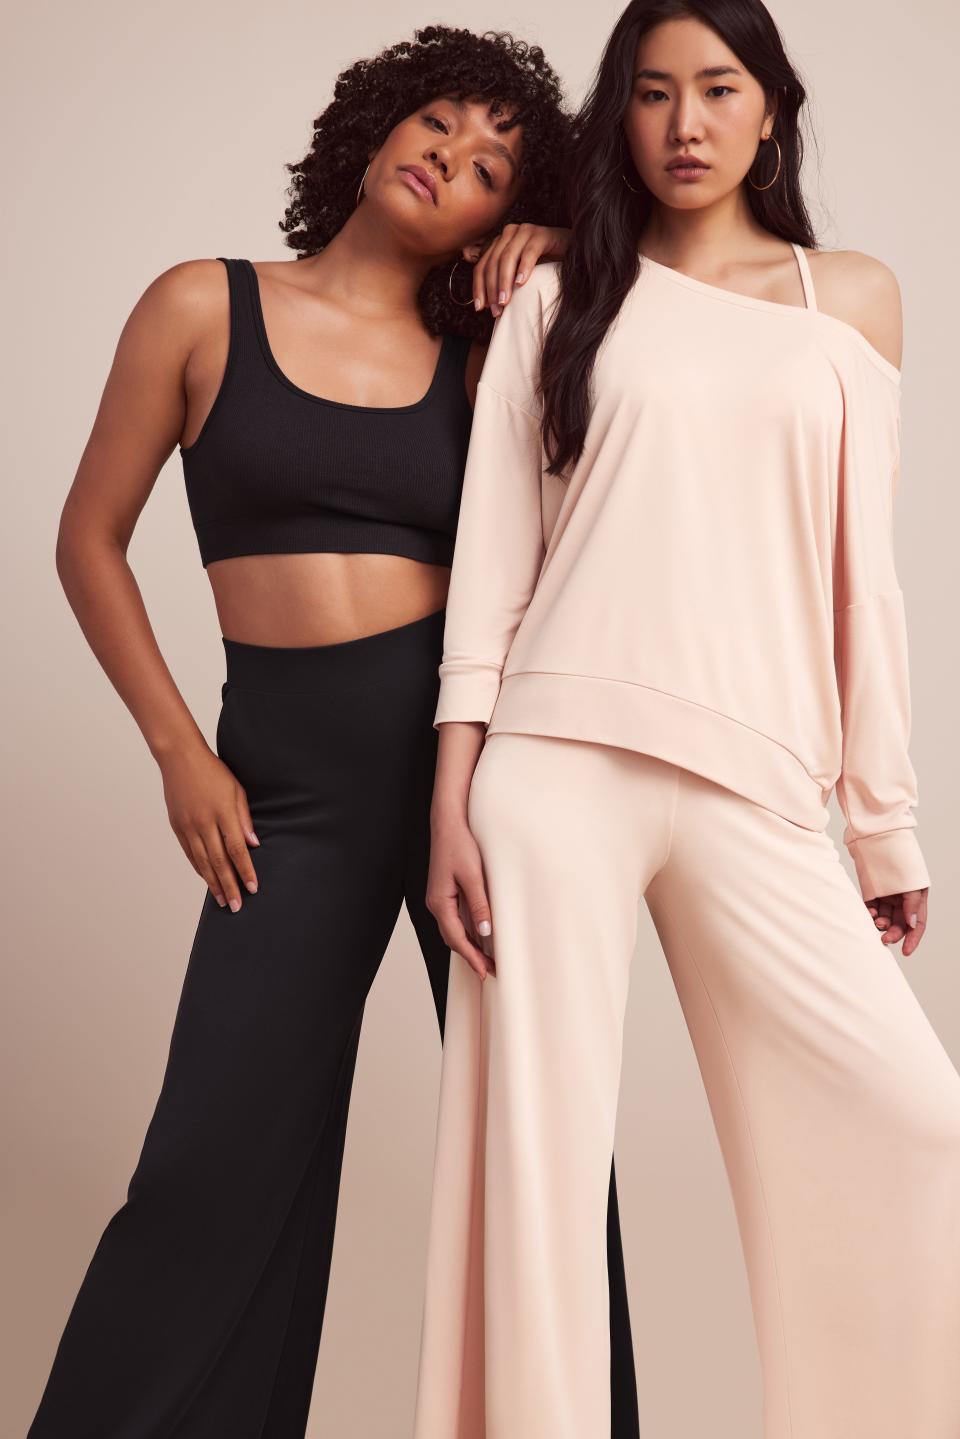 The inaugural 17-piece Fabletics loungewear collection includes wide-legged pants, sports bras, sweatshirts and more. - Credit: Courtesy Photo